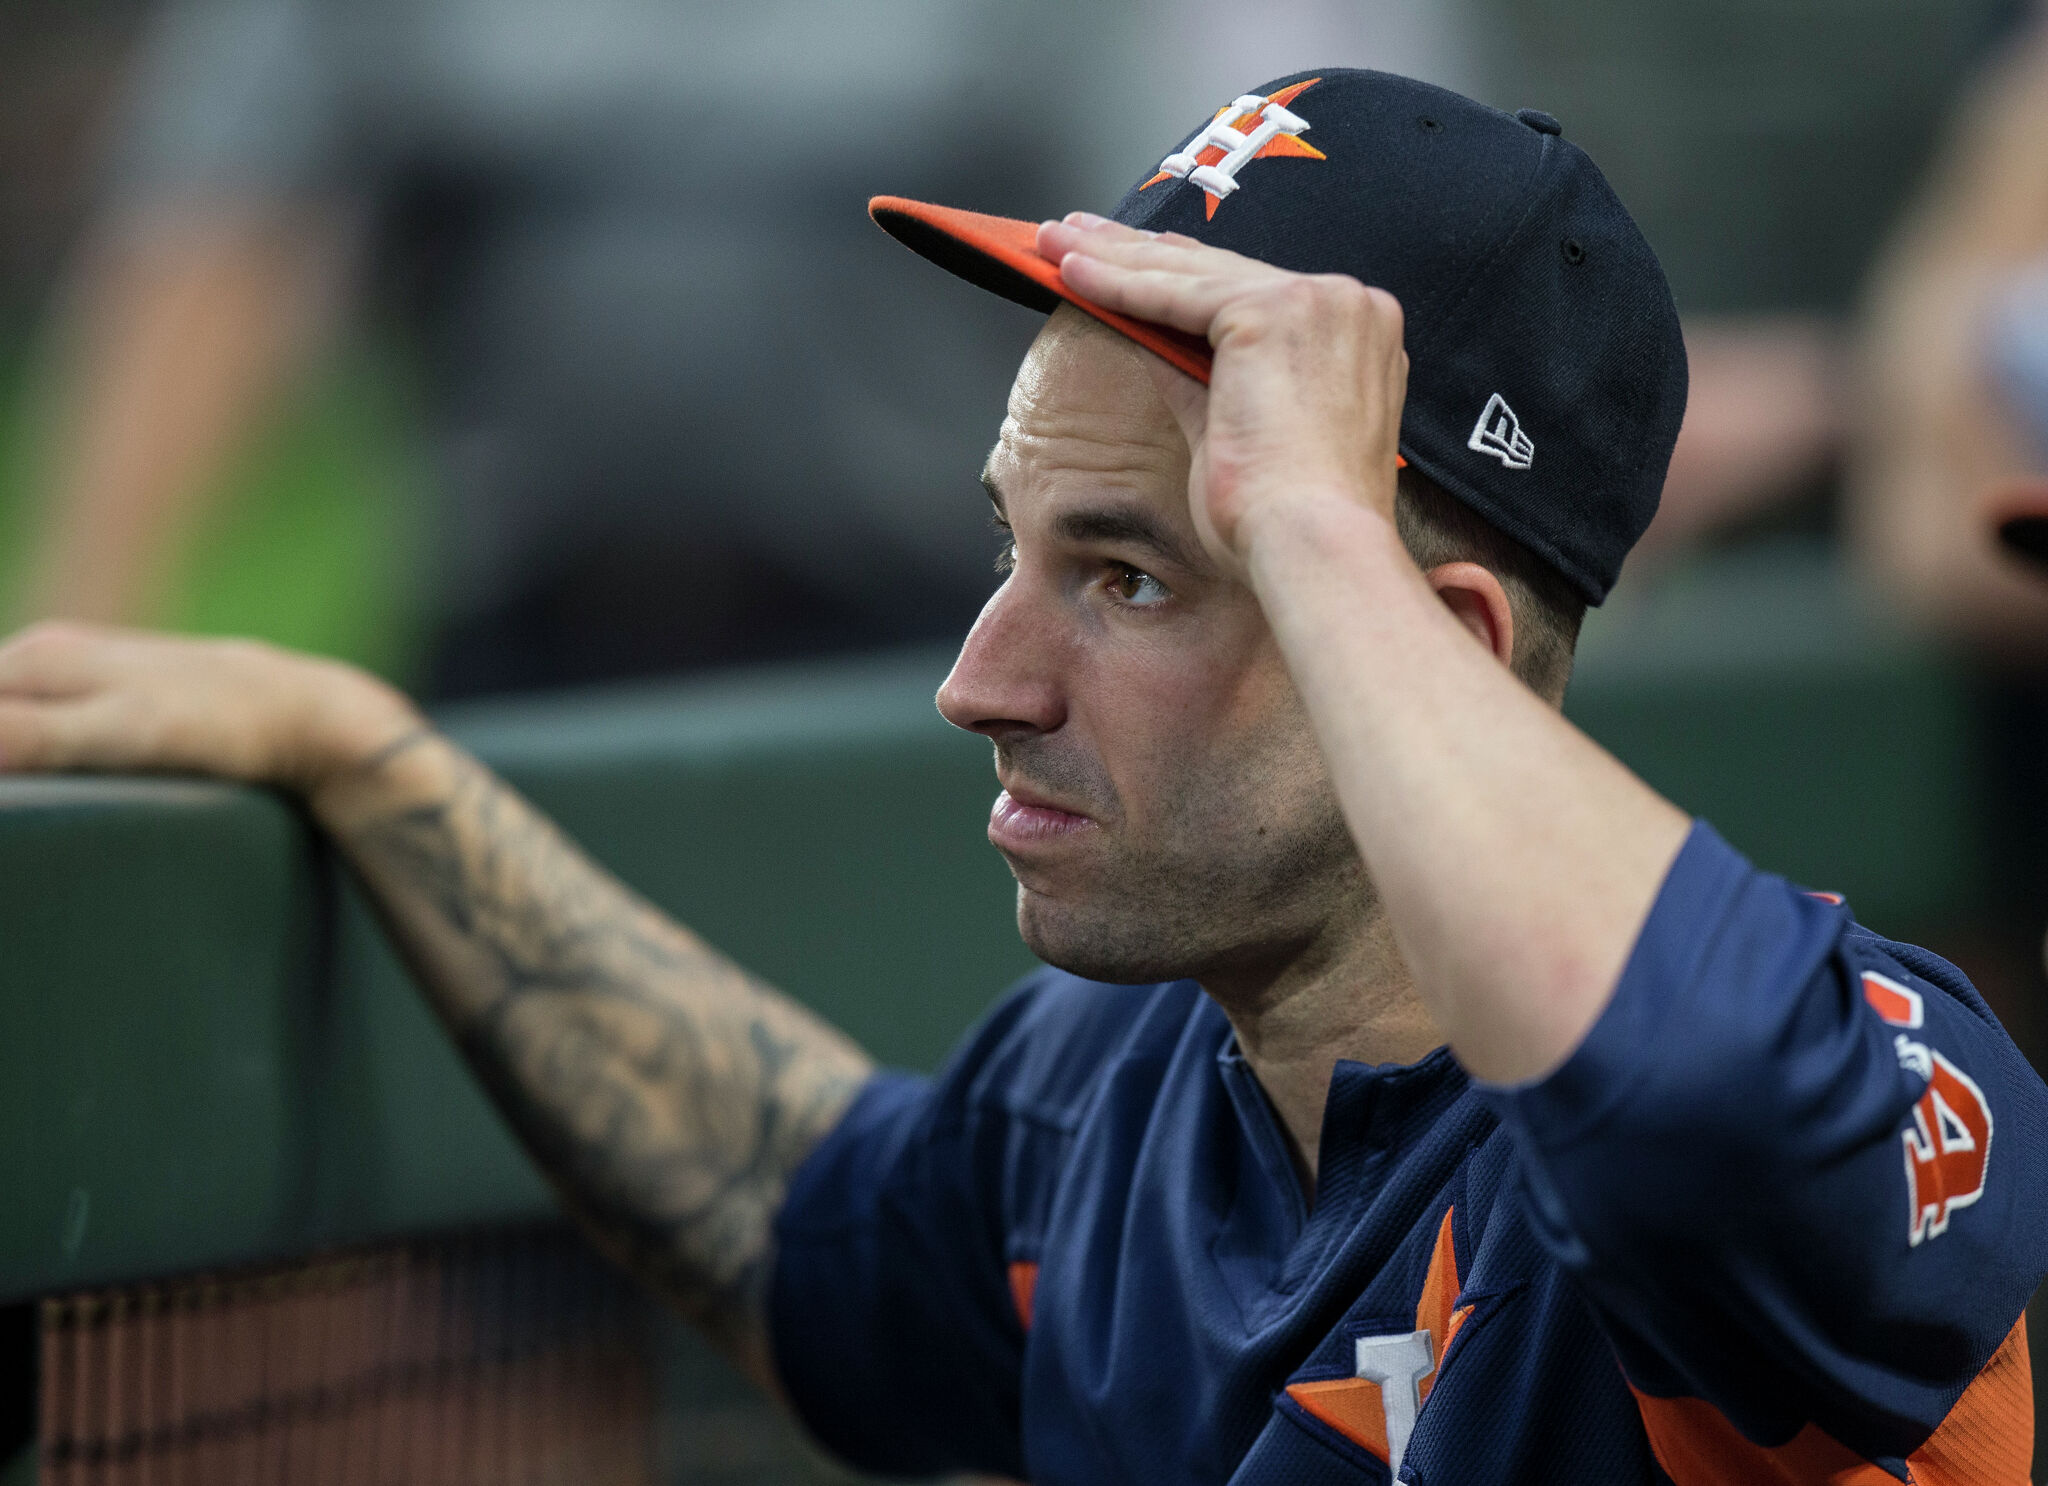 Why Astros fans should read book about sign-stealing scandal